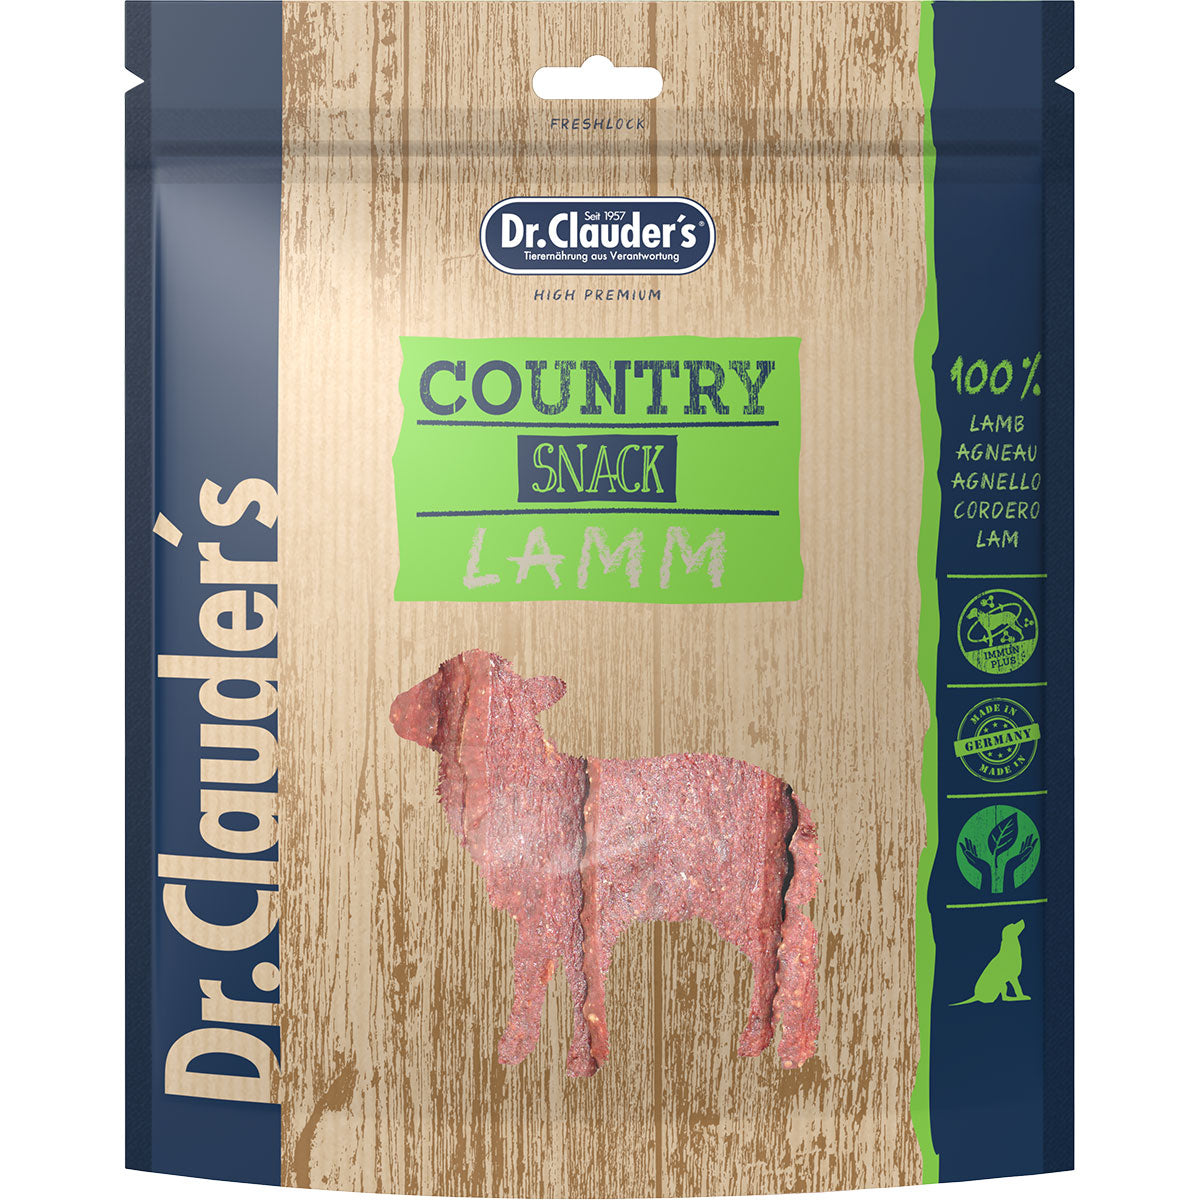 Dr. Clauders Snack Country Lamm, 170g